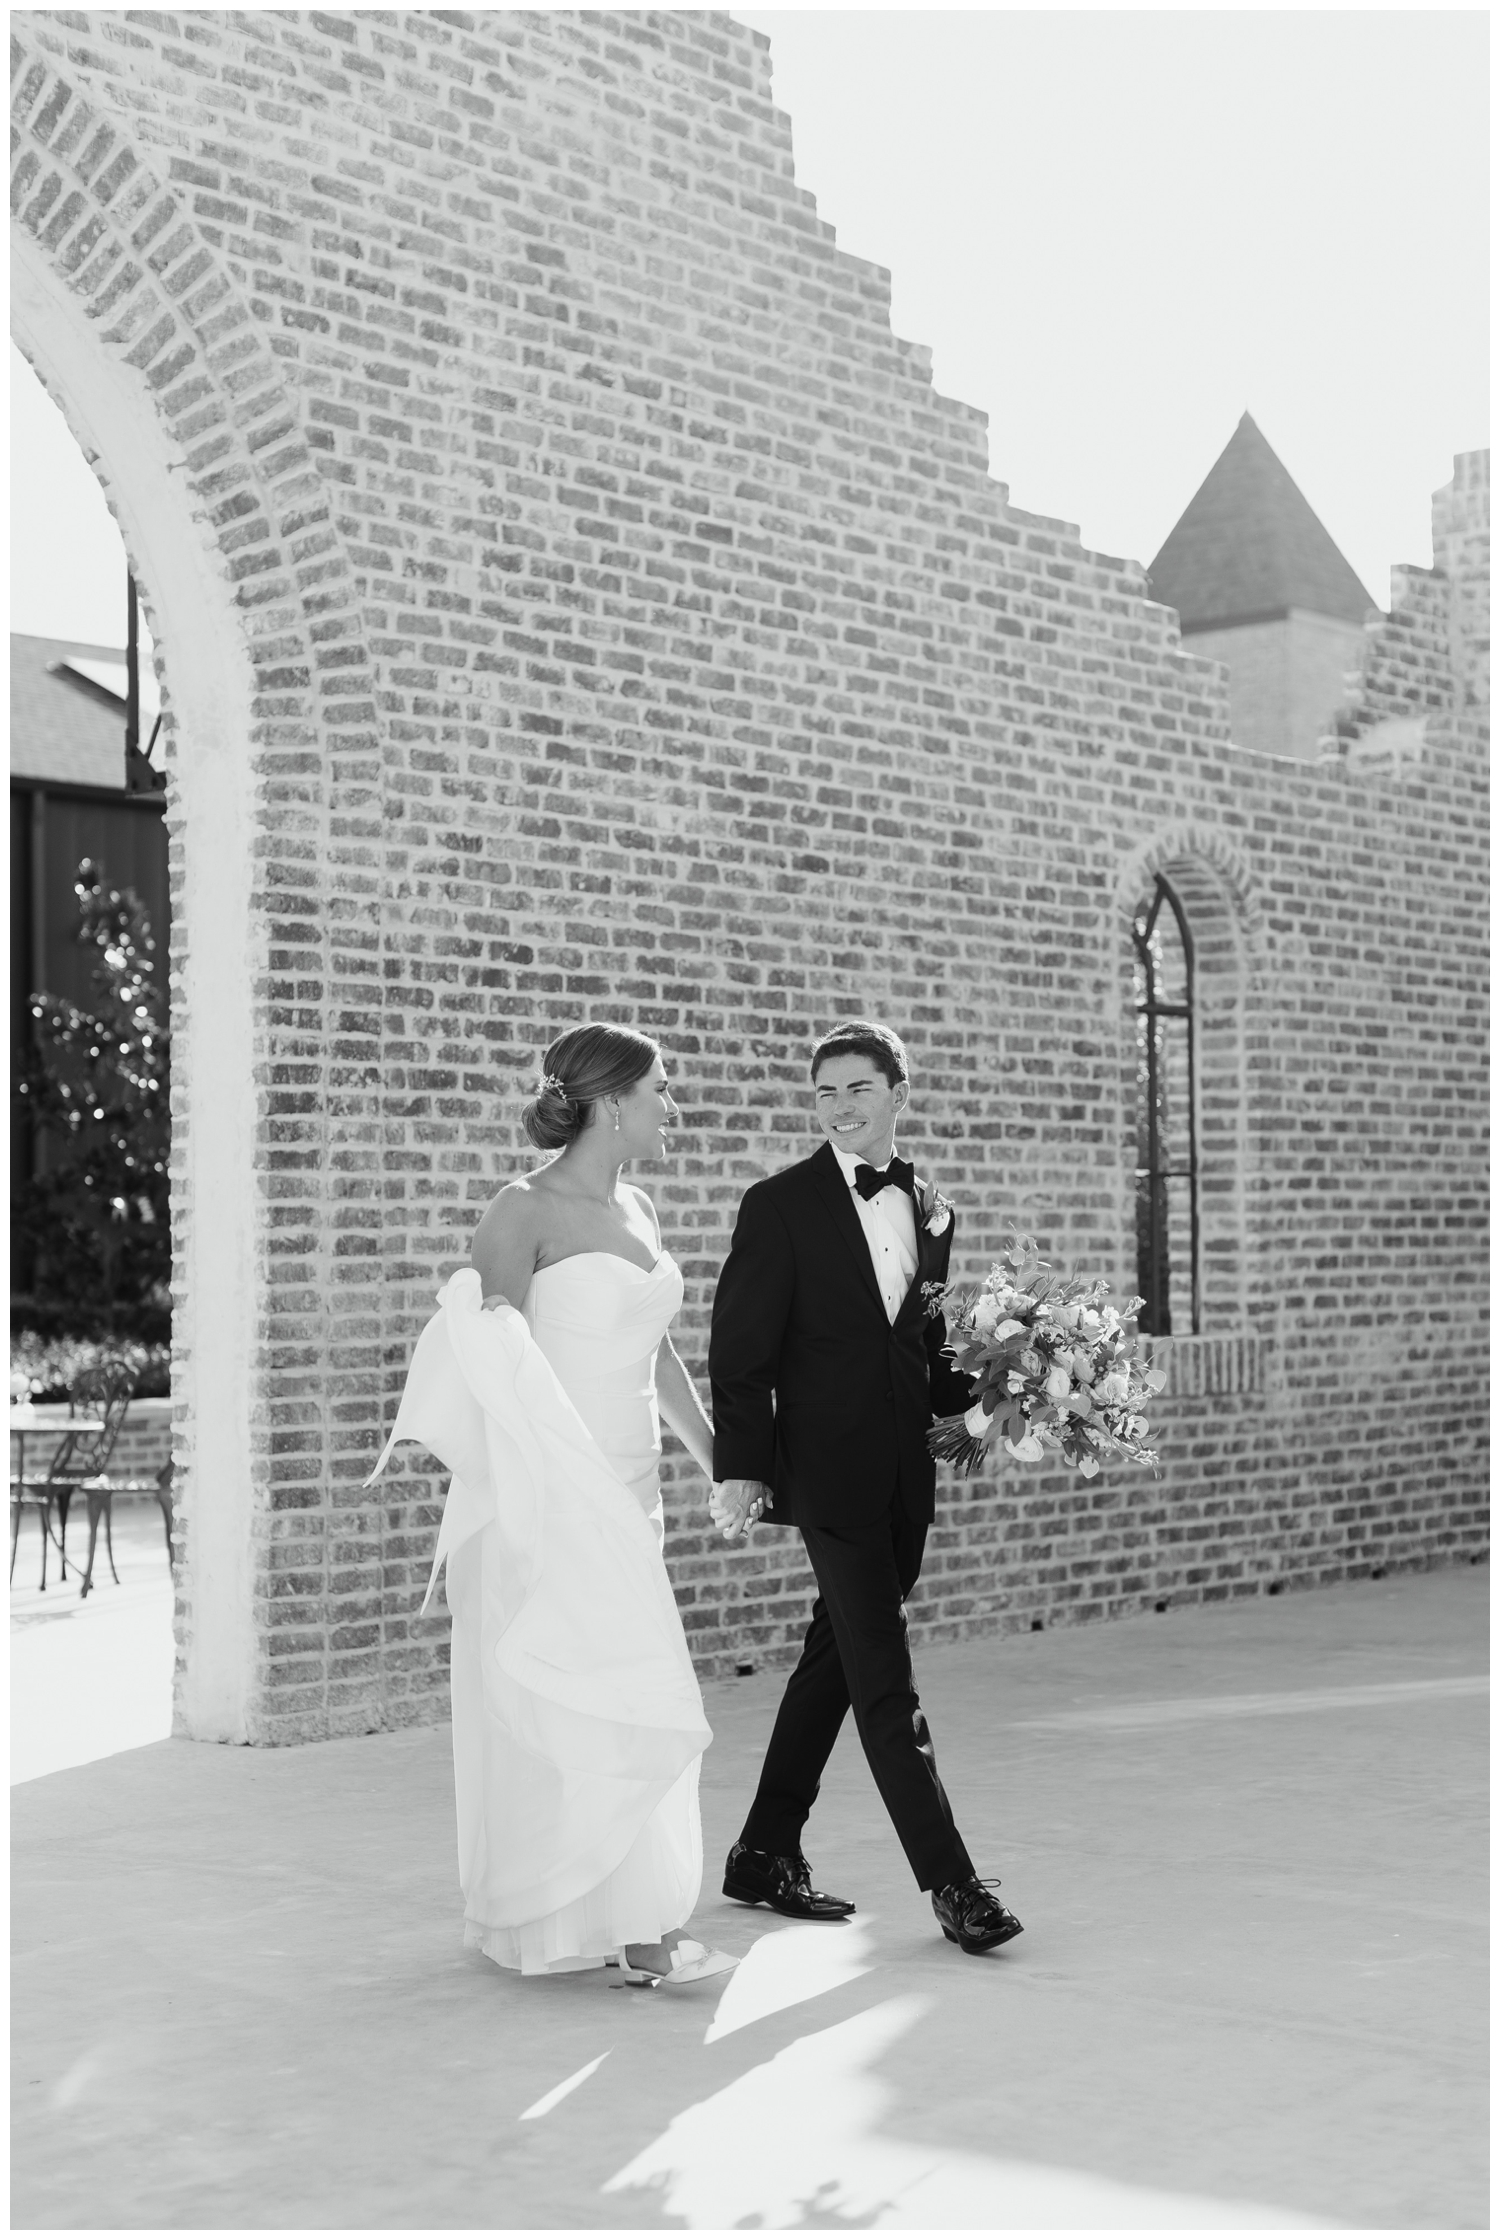 black and white image of bride and groom holding hands walking and looking at each other